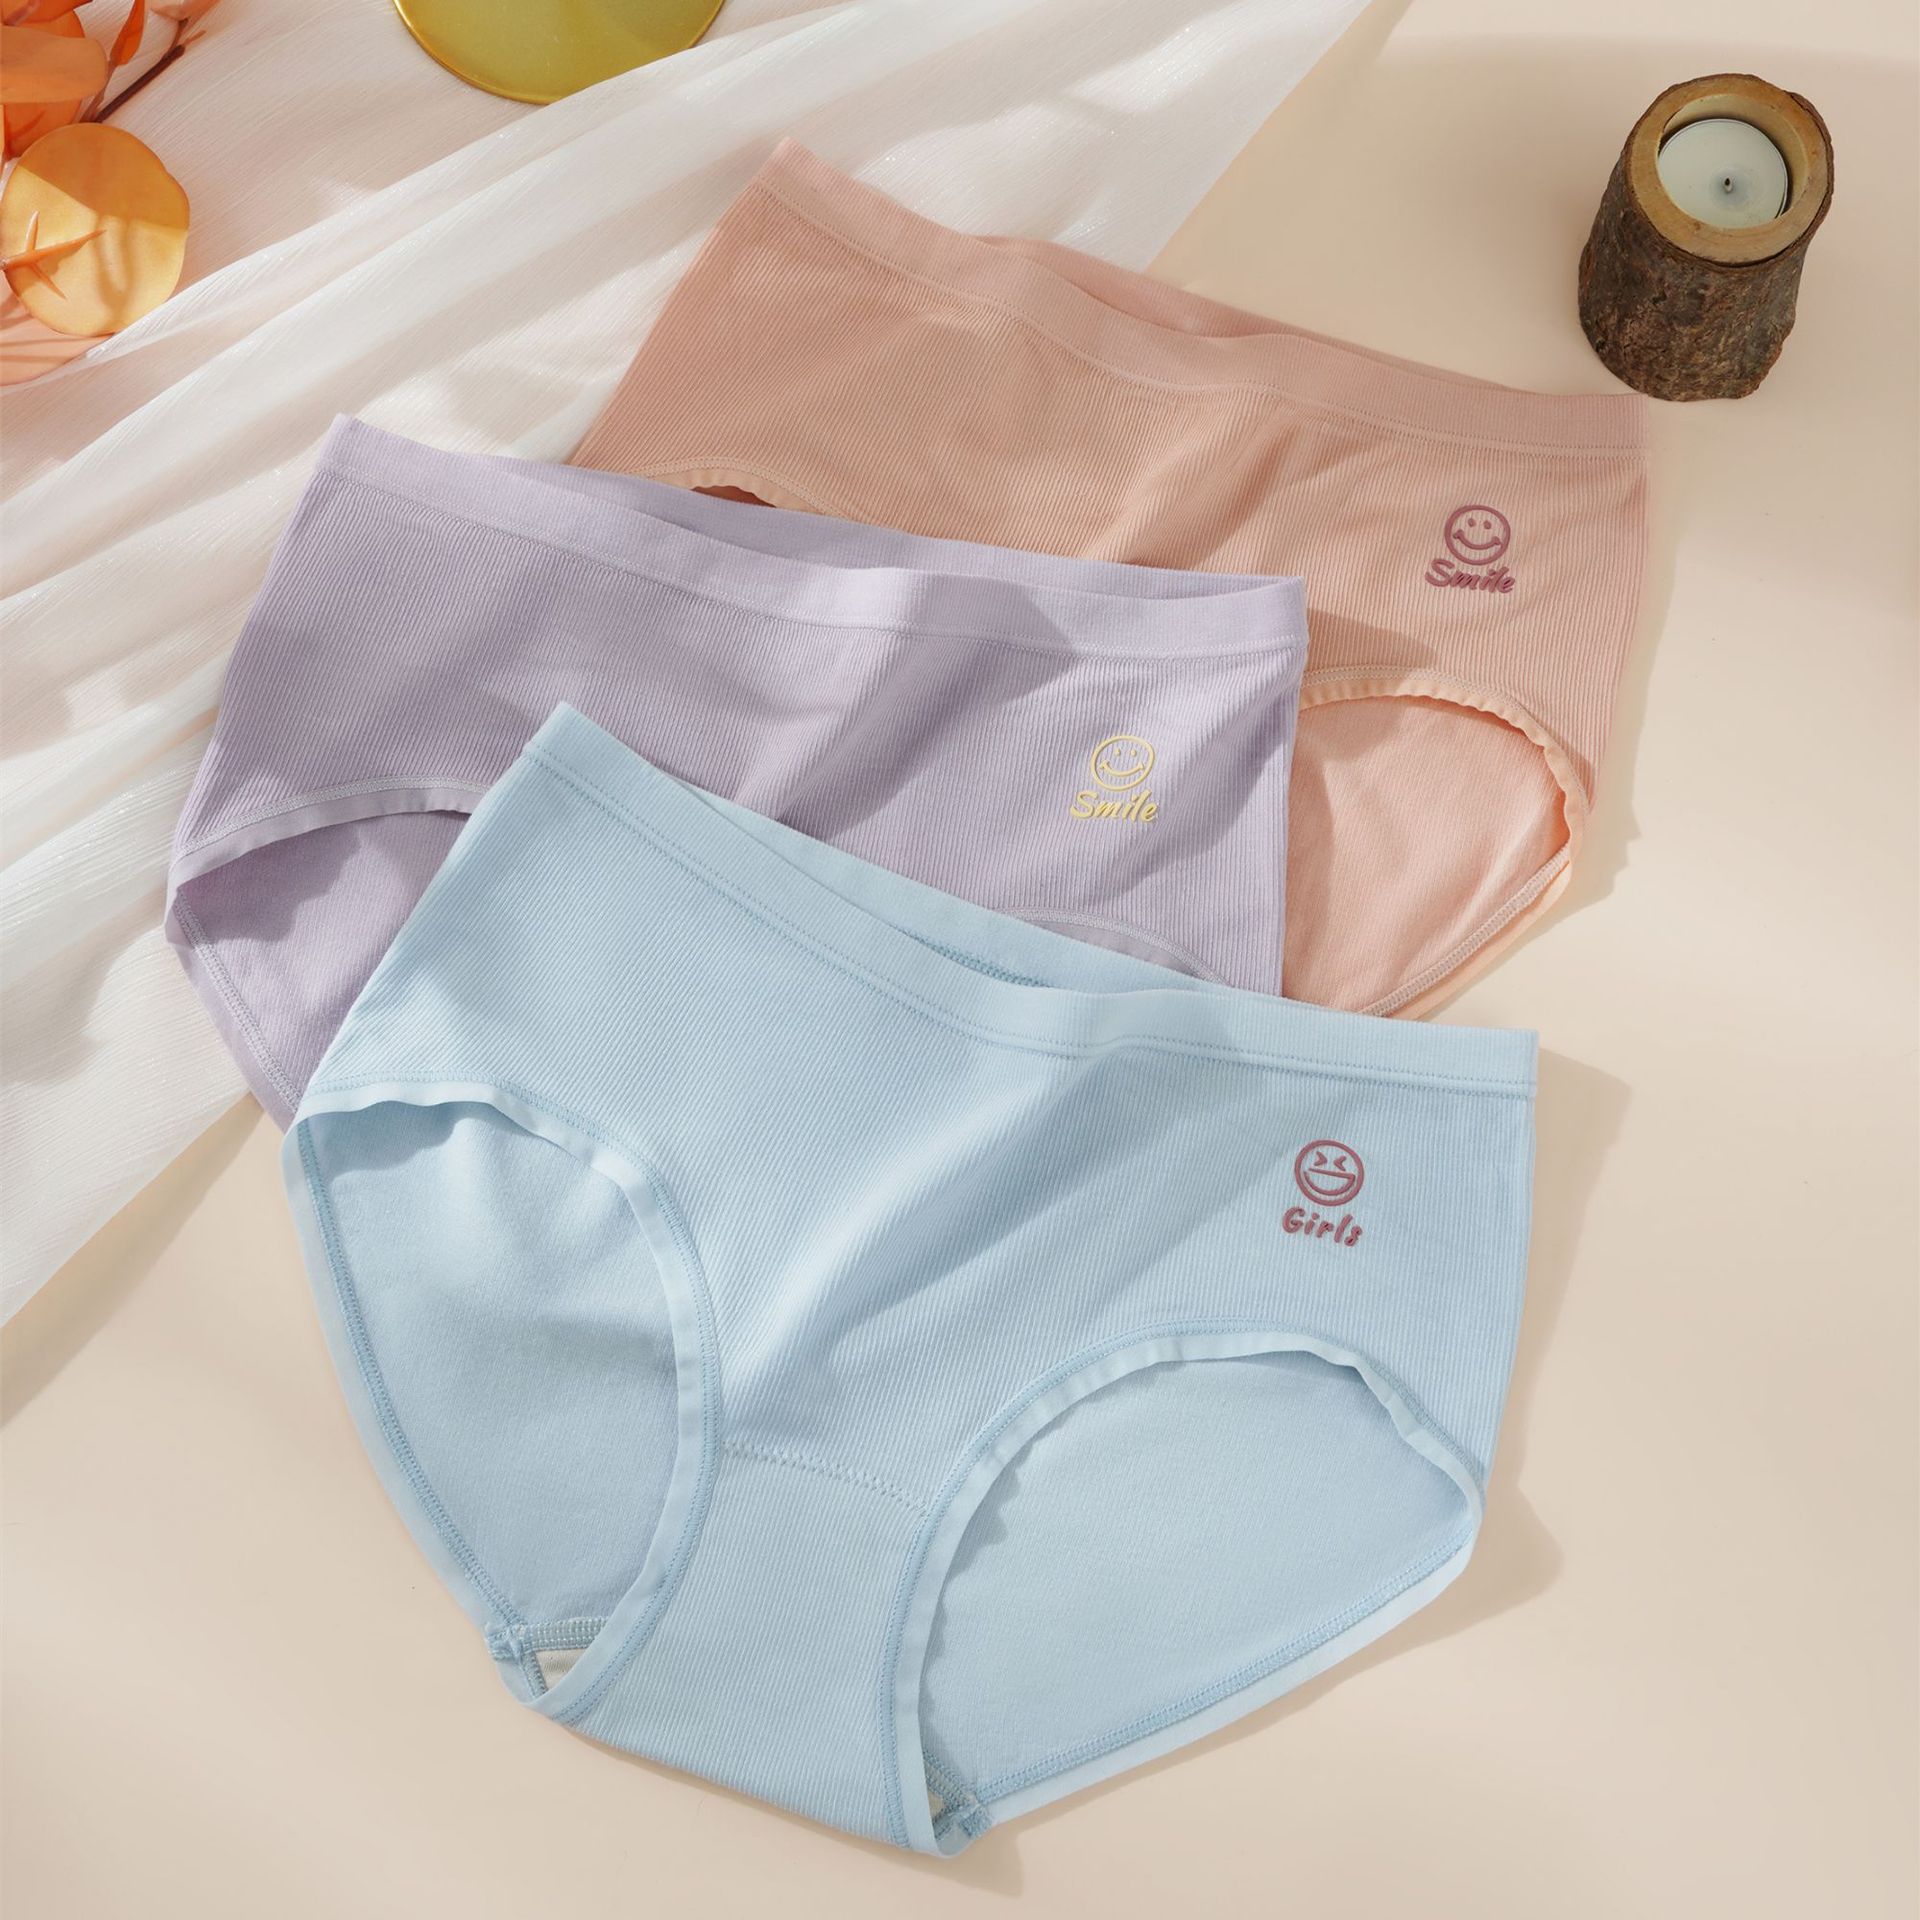 The New Nude Ammonia Modal Women's Seamless Underwear Is Fashionable, Playful and Comfortable, and Romantic 3D Smiley Face Epoxy